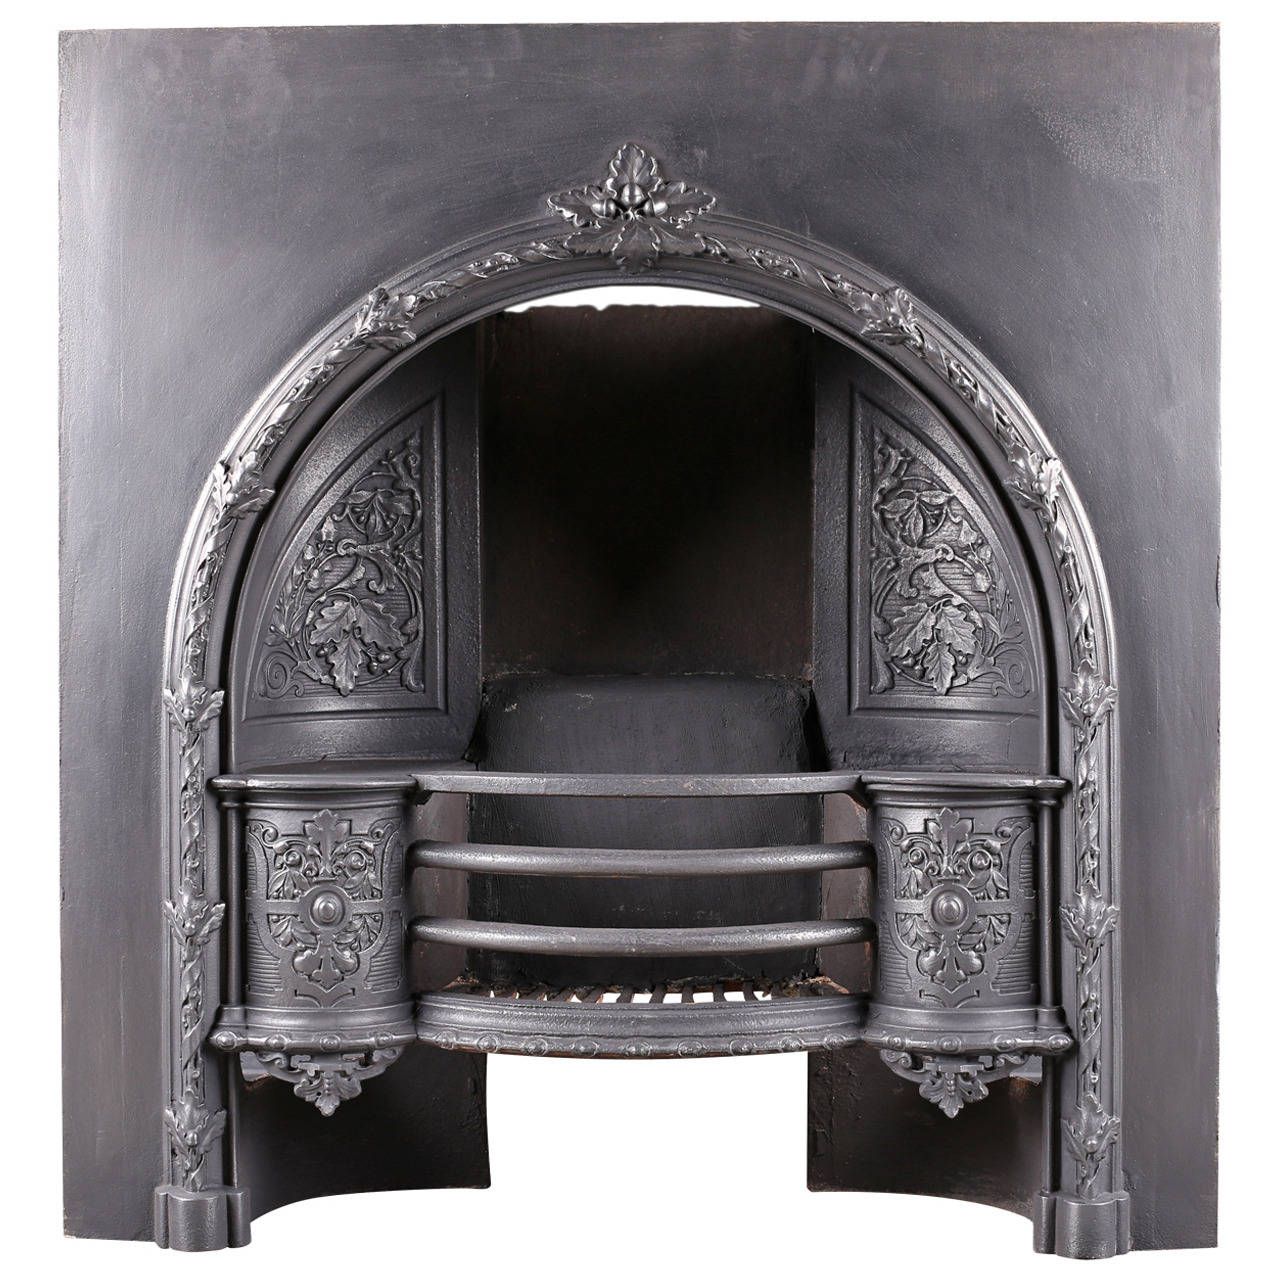 Arched Fireplace Insert Awesome Antique Early Victorian Cast Iron Fireplace Grate